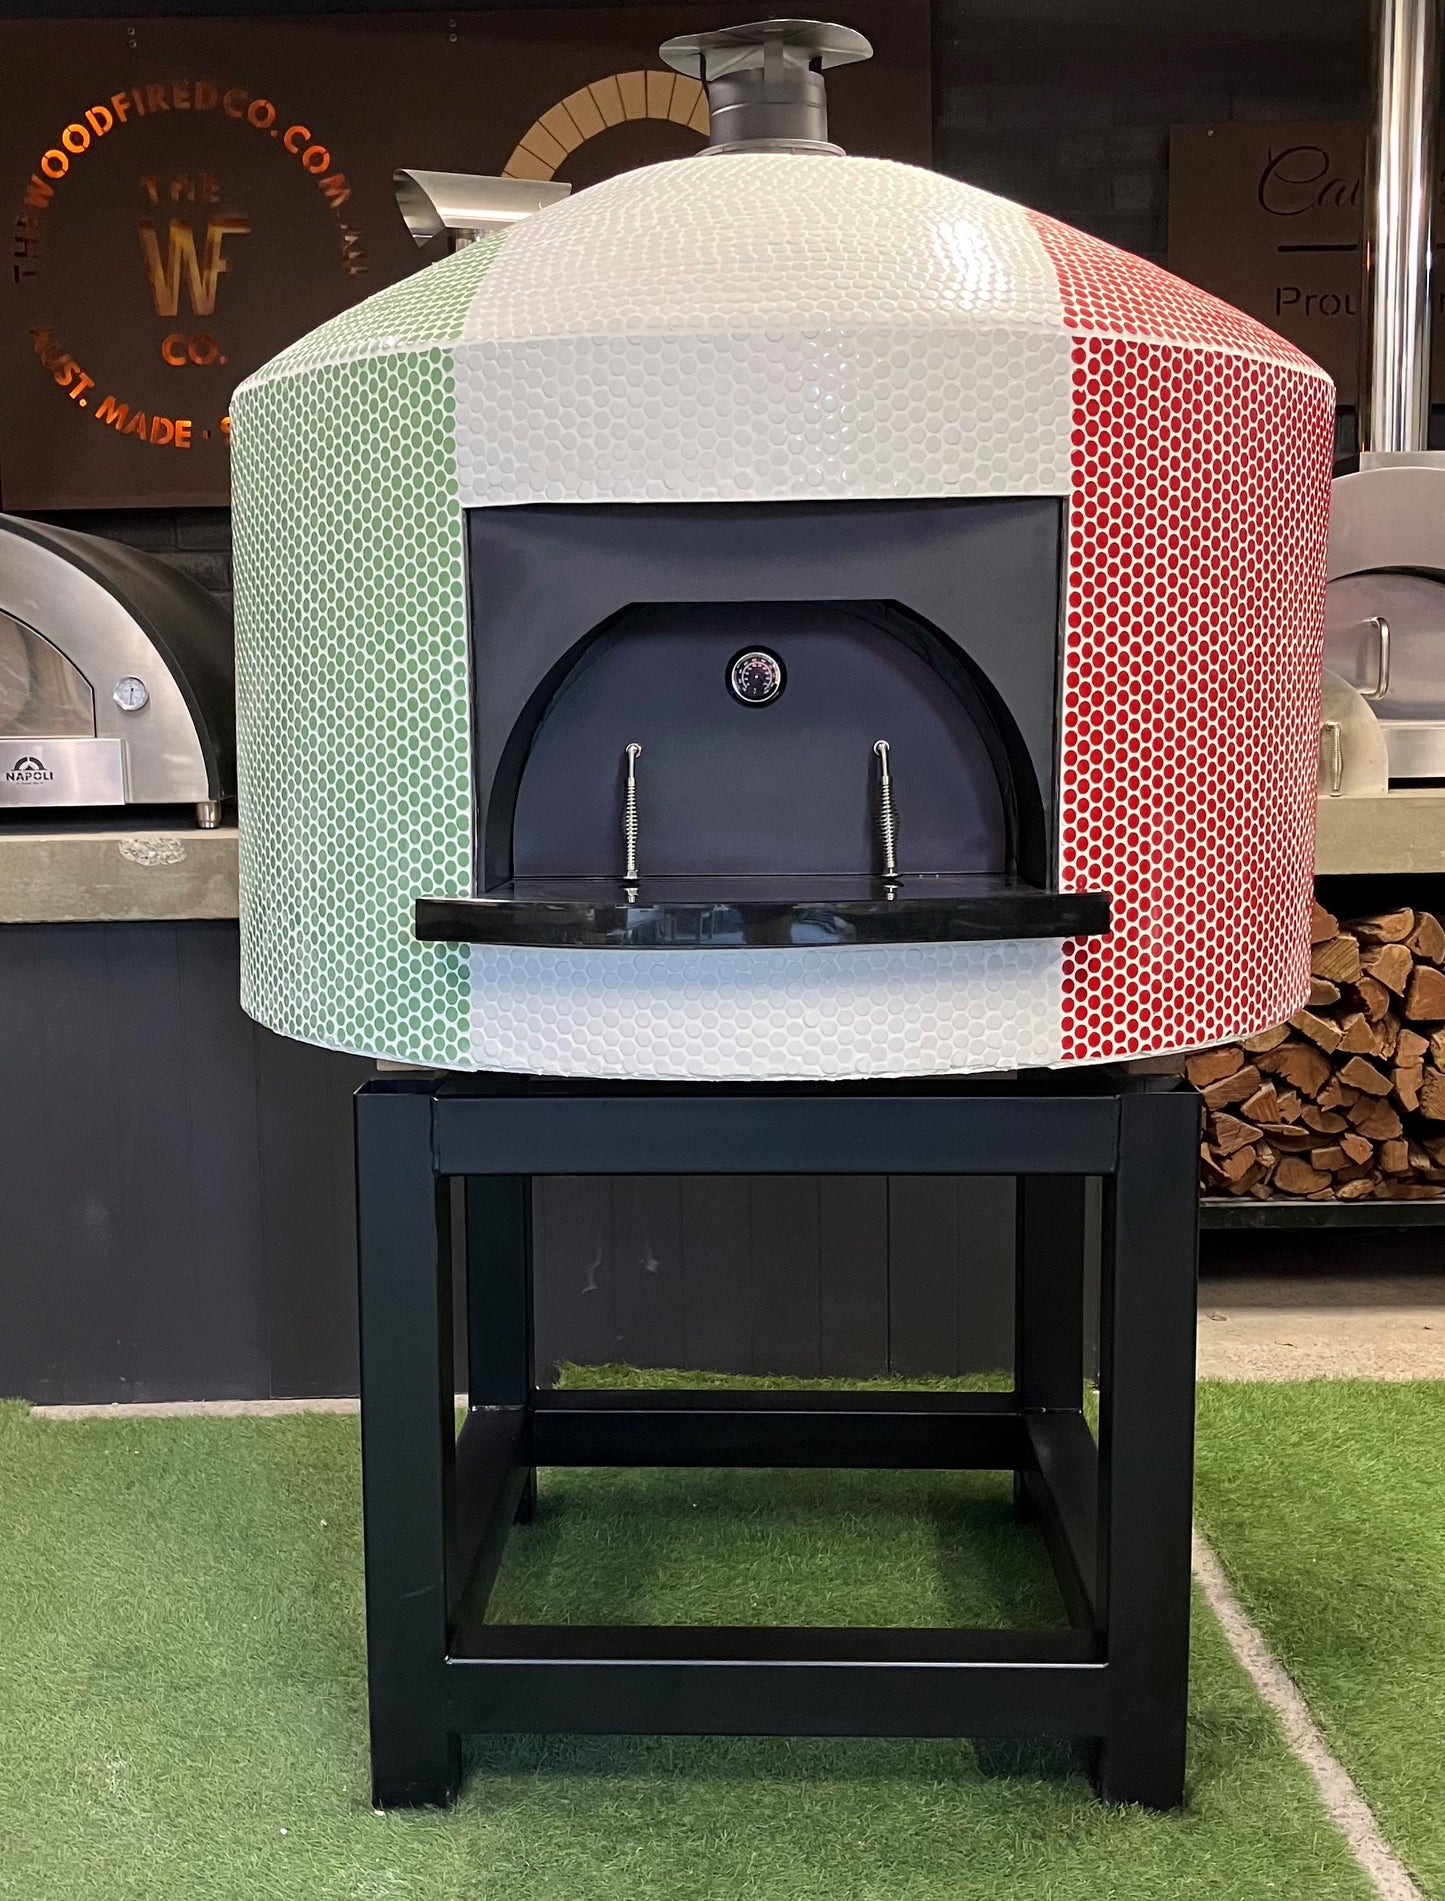 Mini outdoor wood fired oven - The Woodfired Co